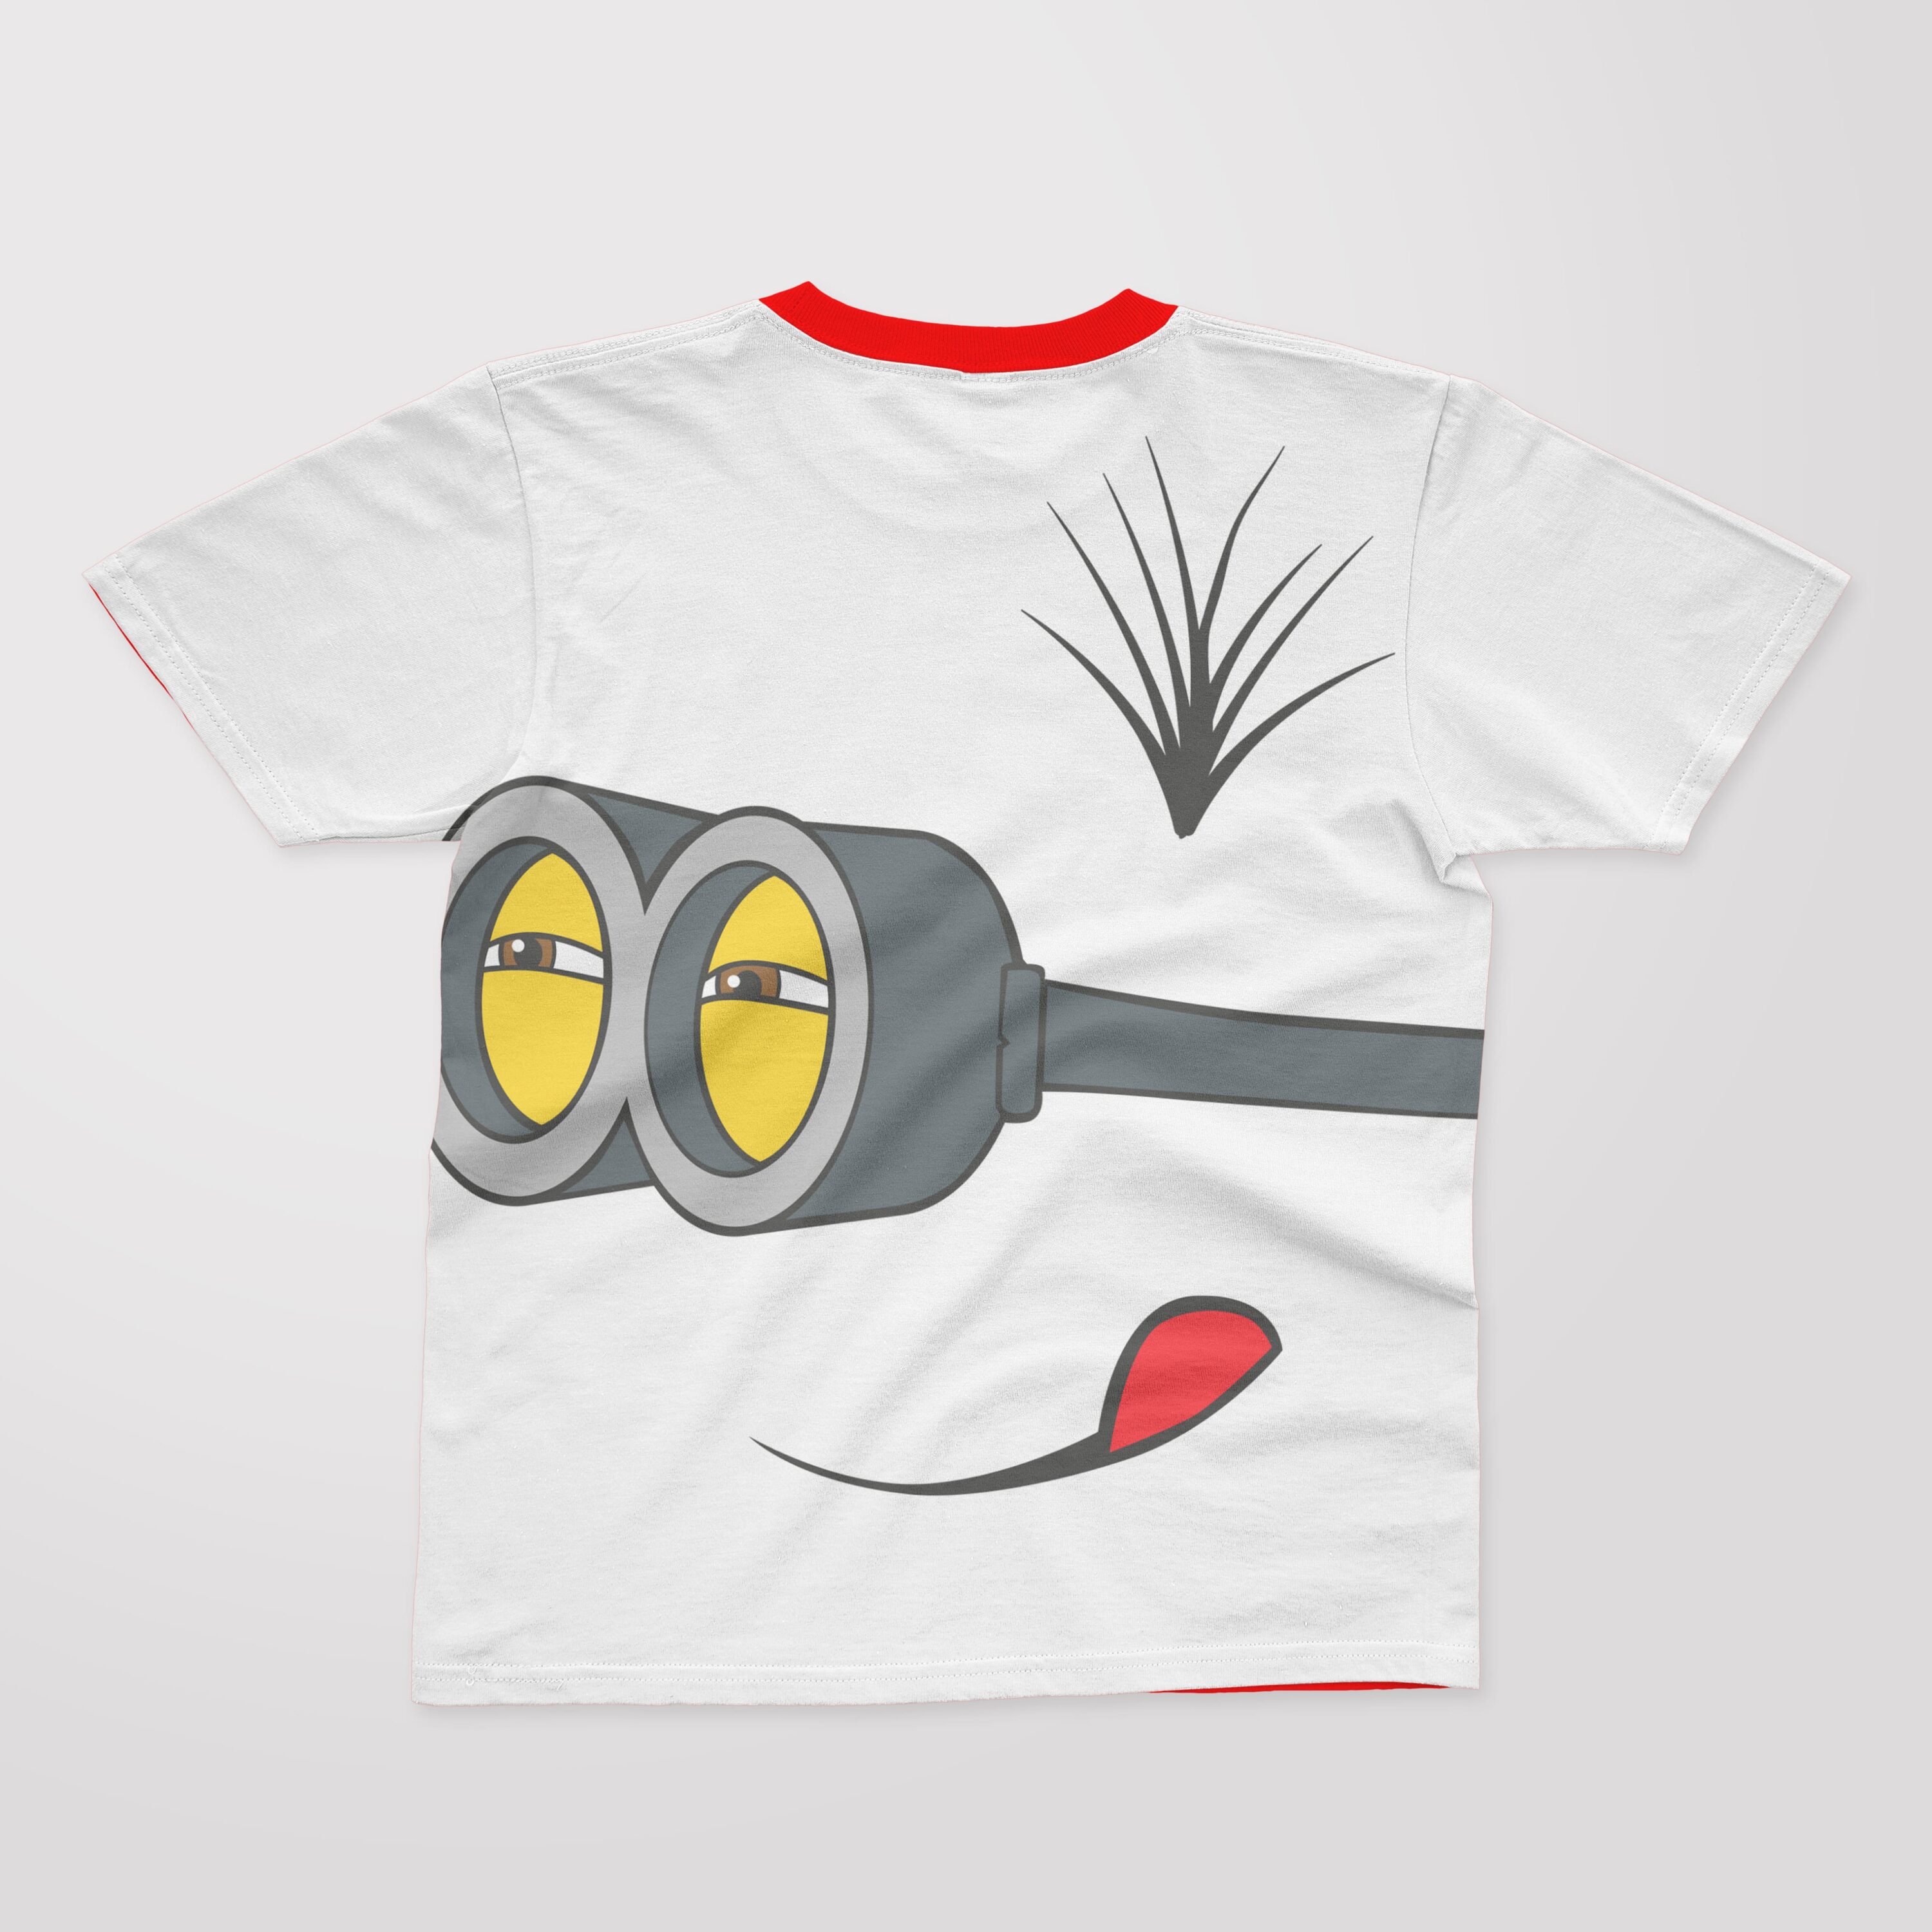 A white T-shirt with a red collar and a face of an interested minion.